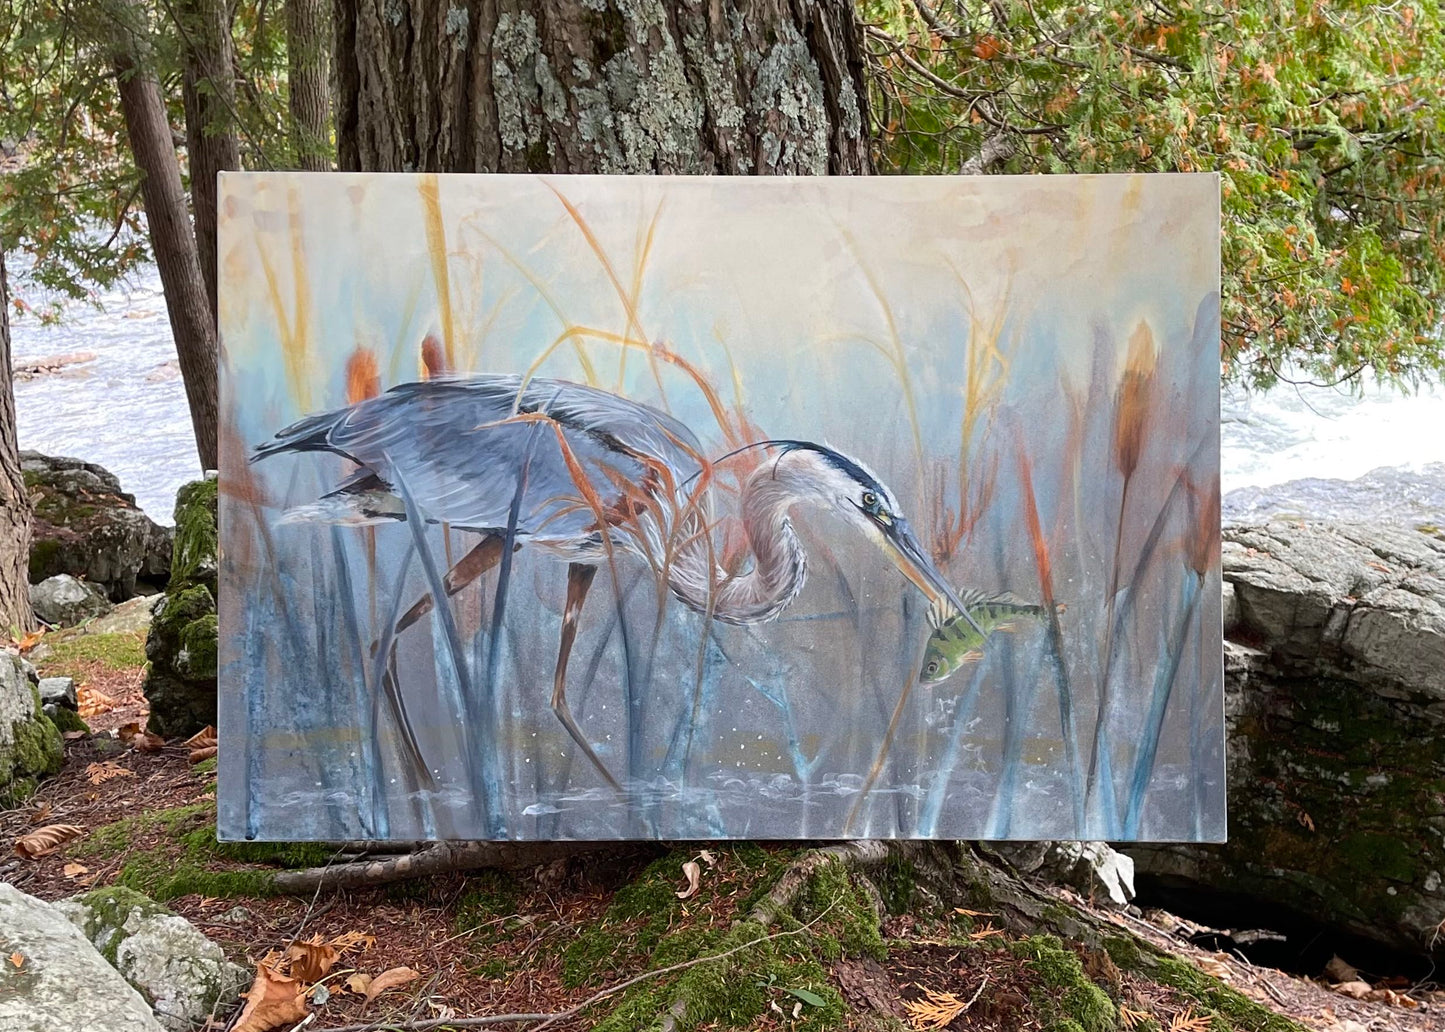 Heron and Perch | 24x36 | ORIGINAL SPRAY PAINT AND ACRYLIC PAINTING ON CANVAS | 22-36P